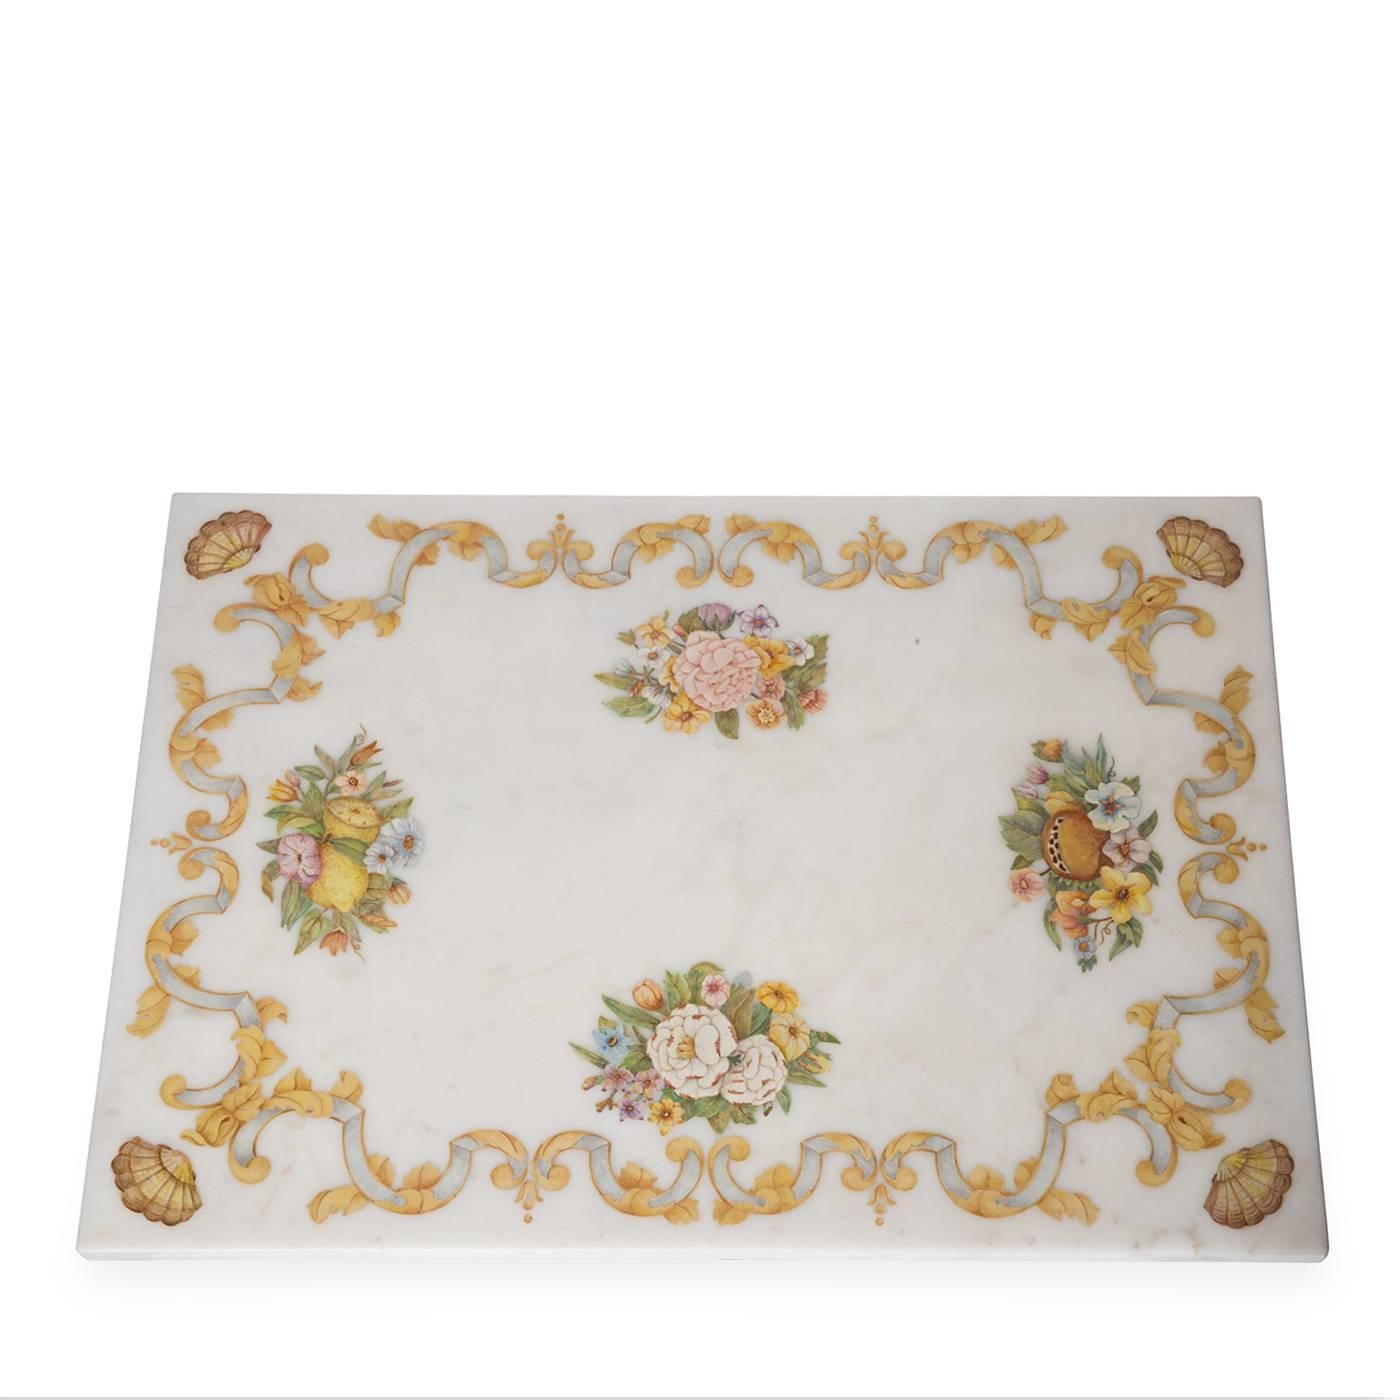 Tabletop handcrafted by Tuscan marble workshop Bianco Bianchi. The white marble is inlaid with a motif depicting flowers and fruit in a colorful scagliola inlay, and rests on an antique, hand-forged, wrought iron base.